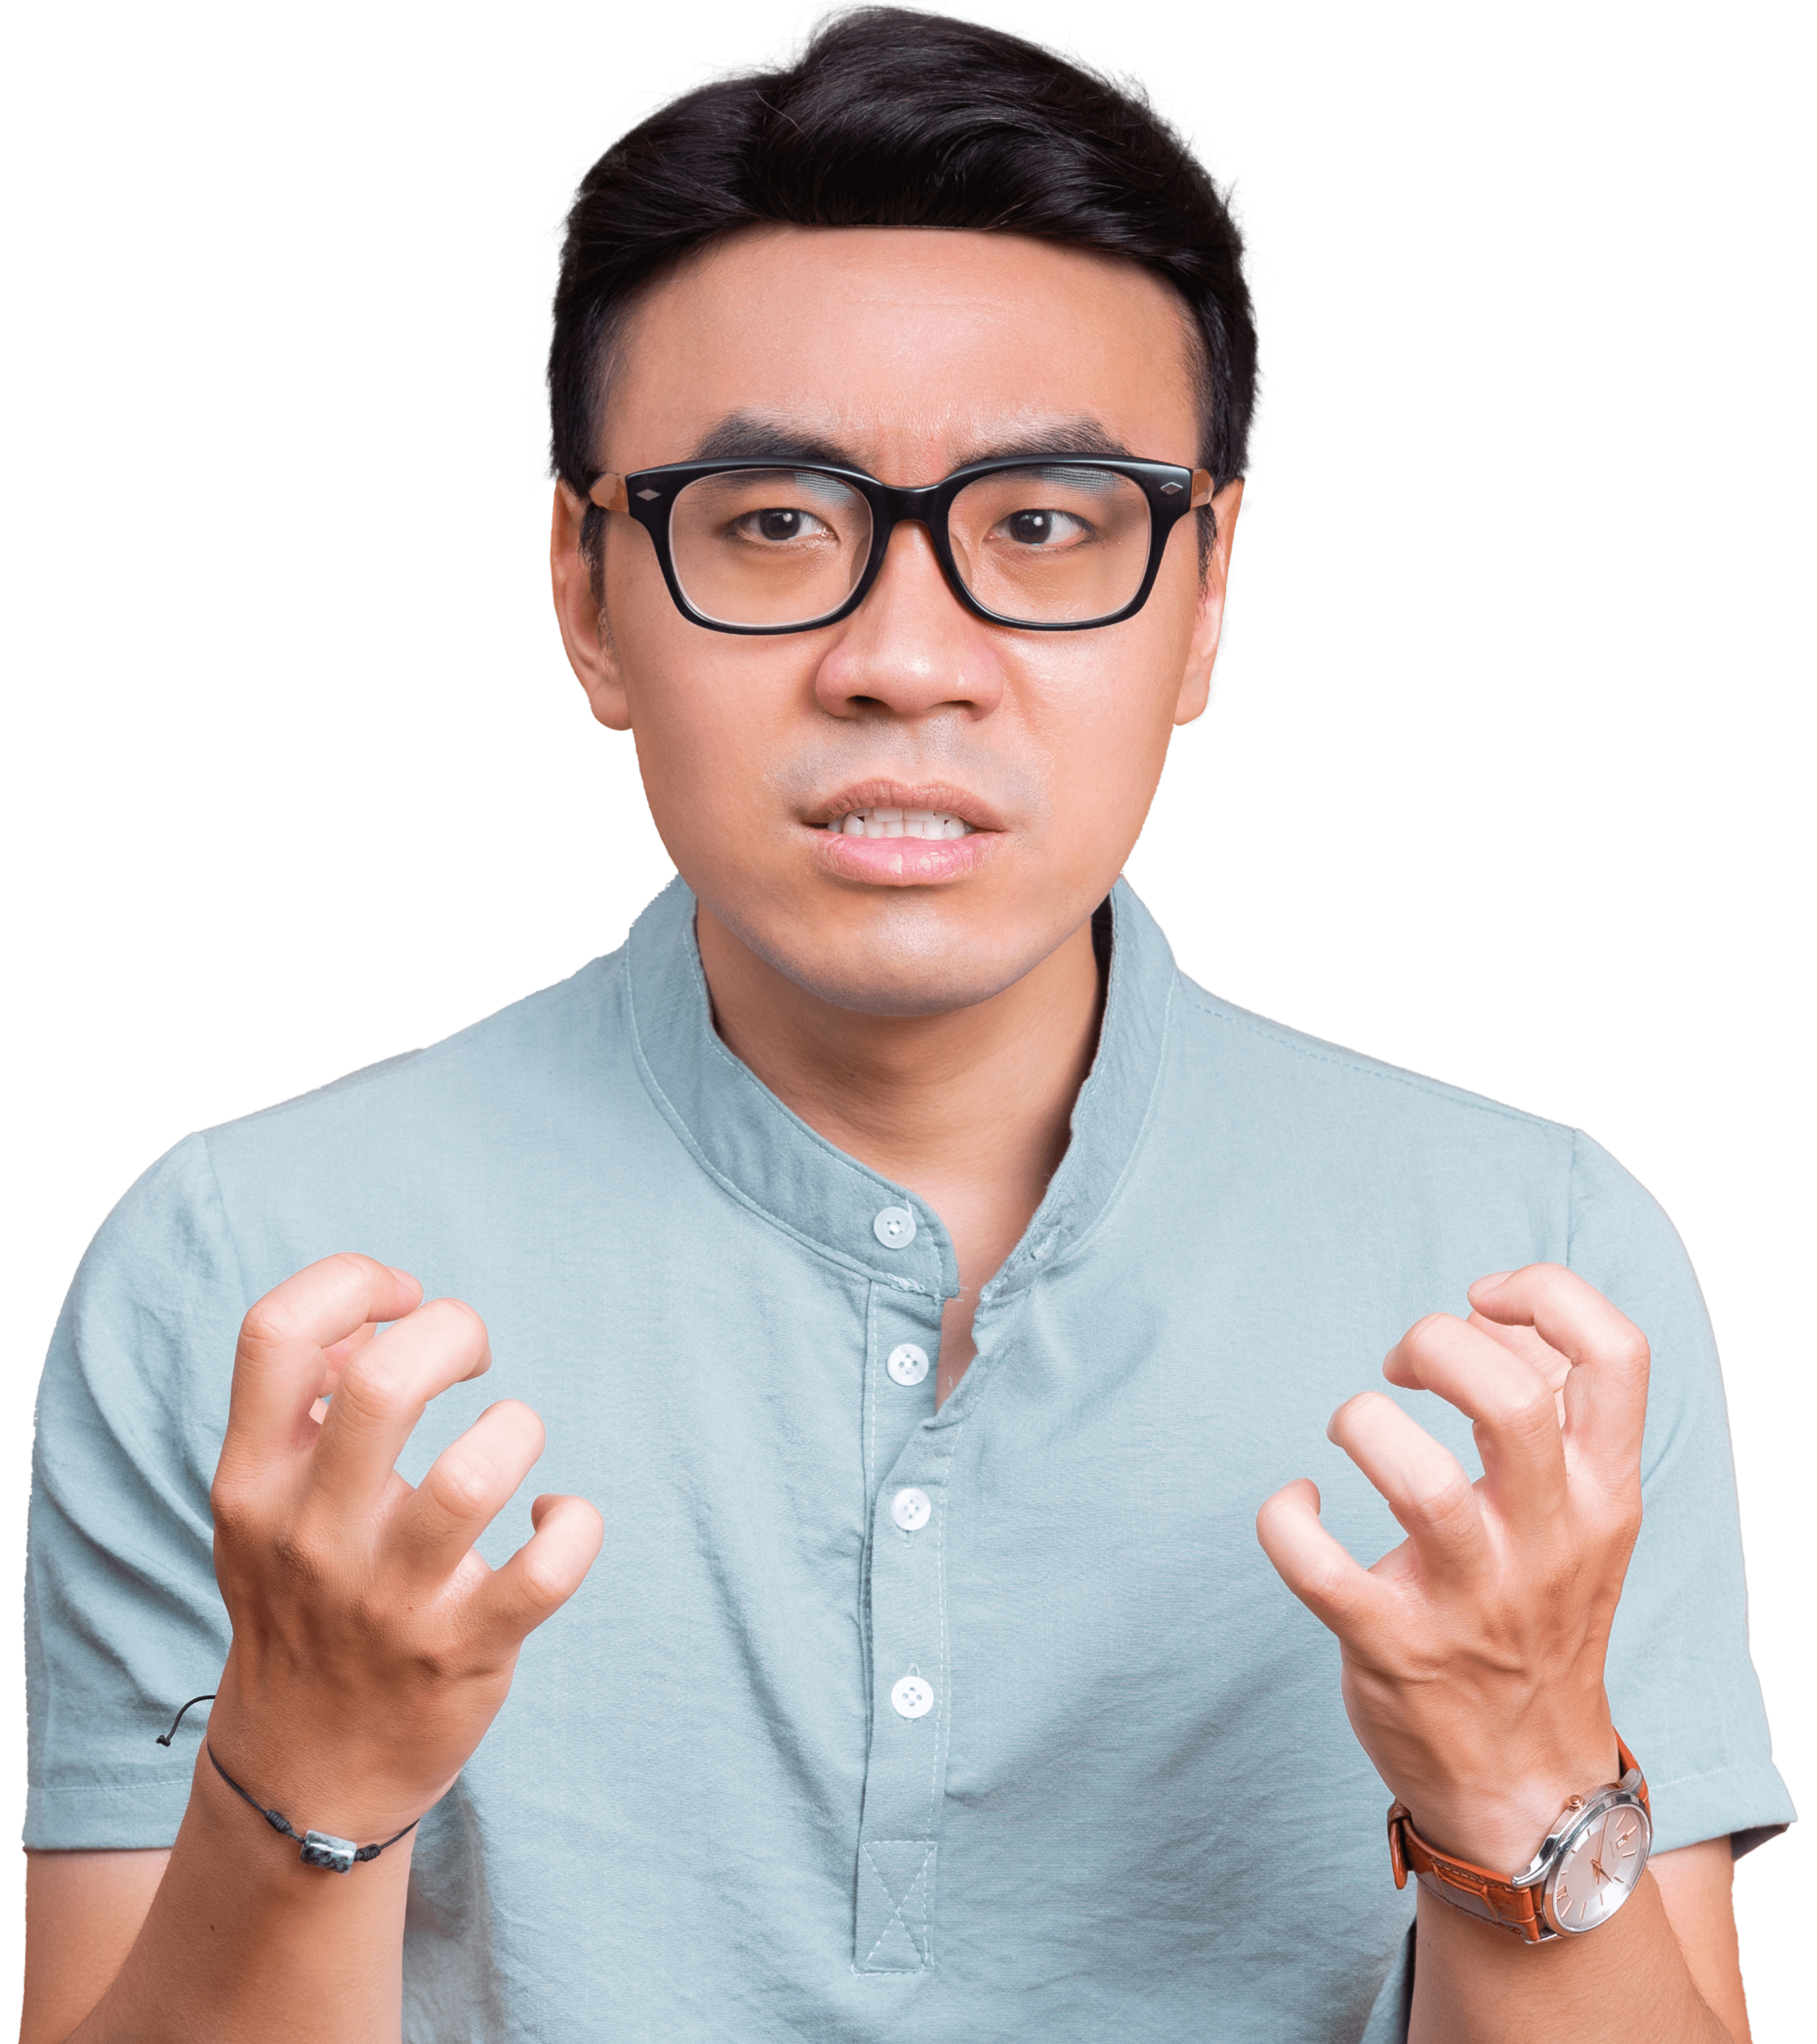 Man with glasses, shirt, looks angry